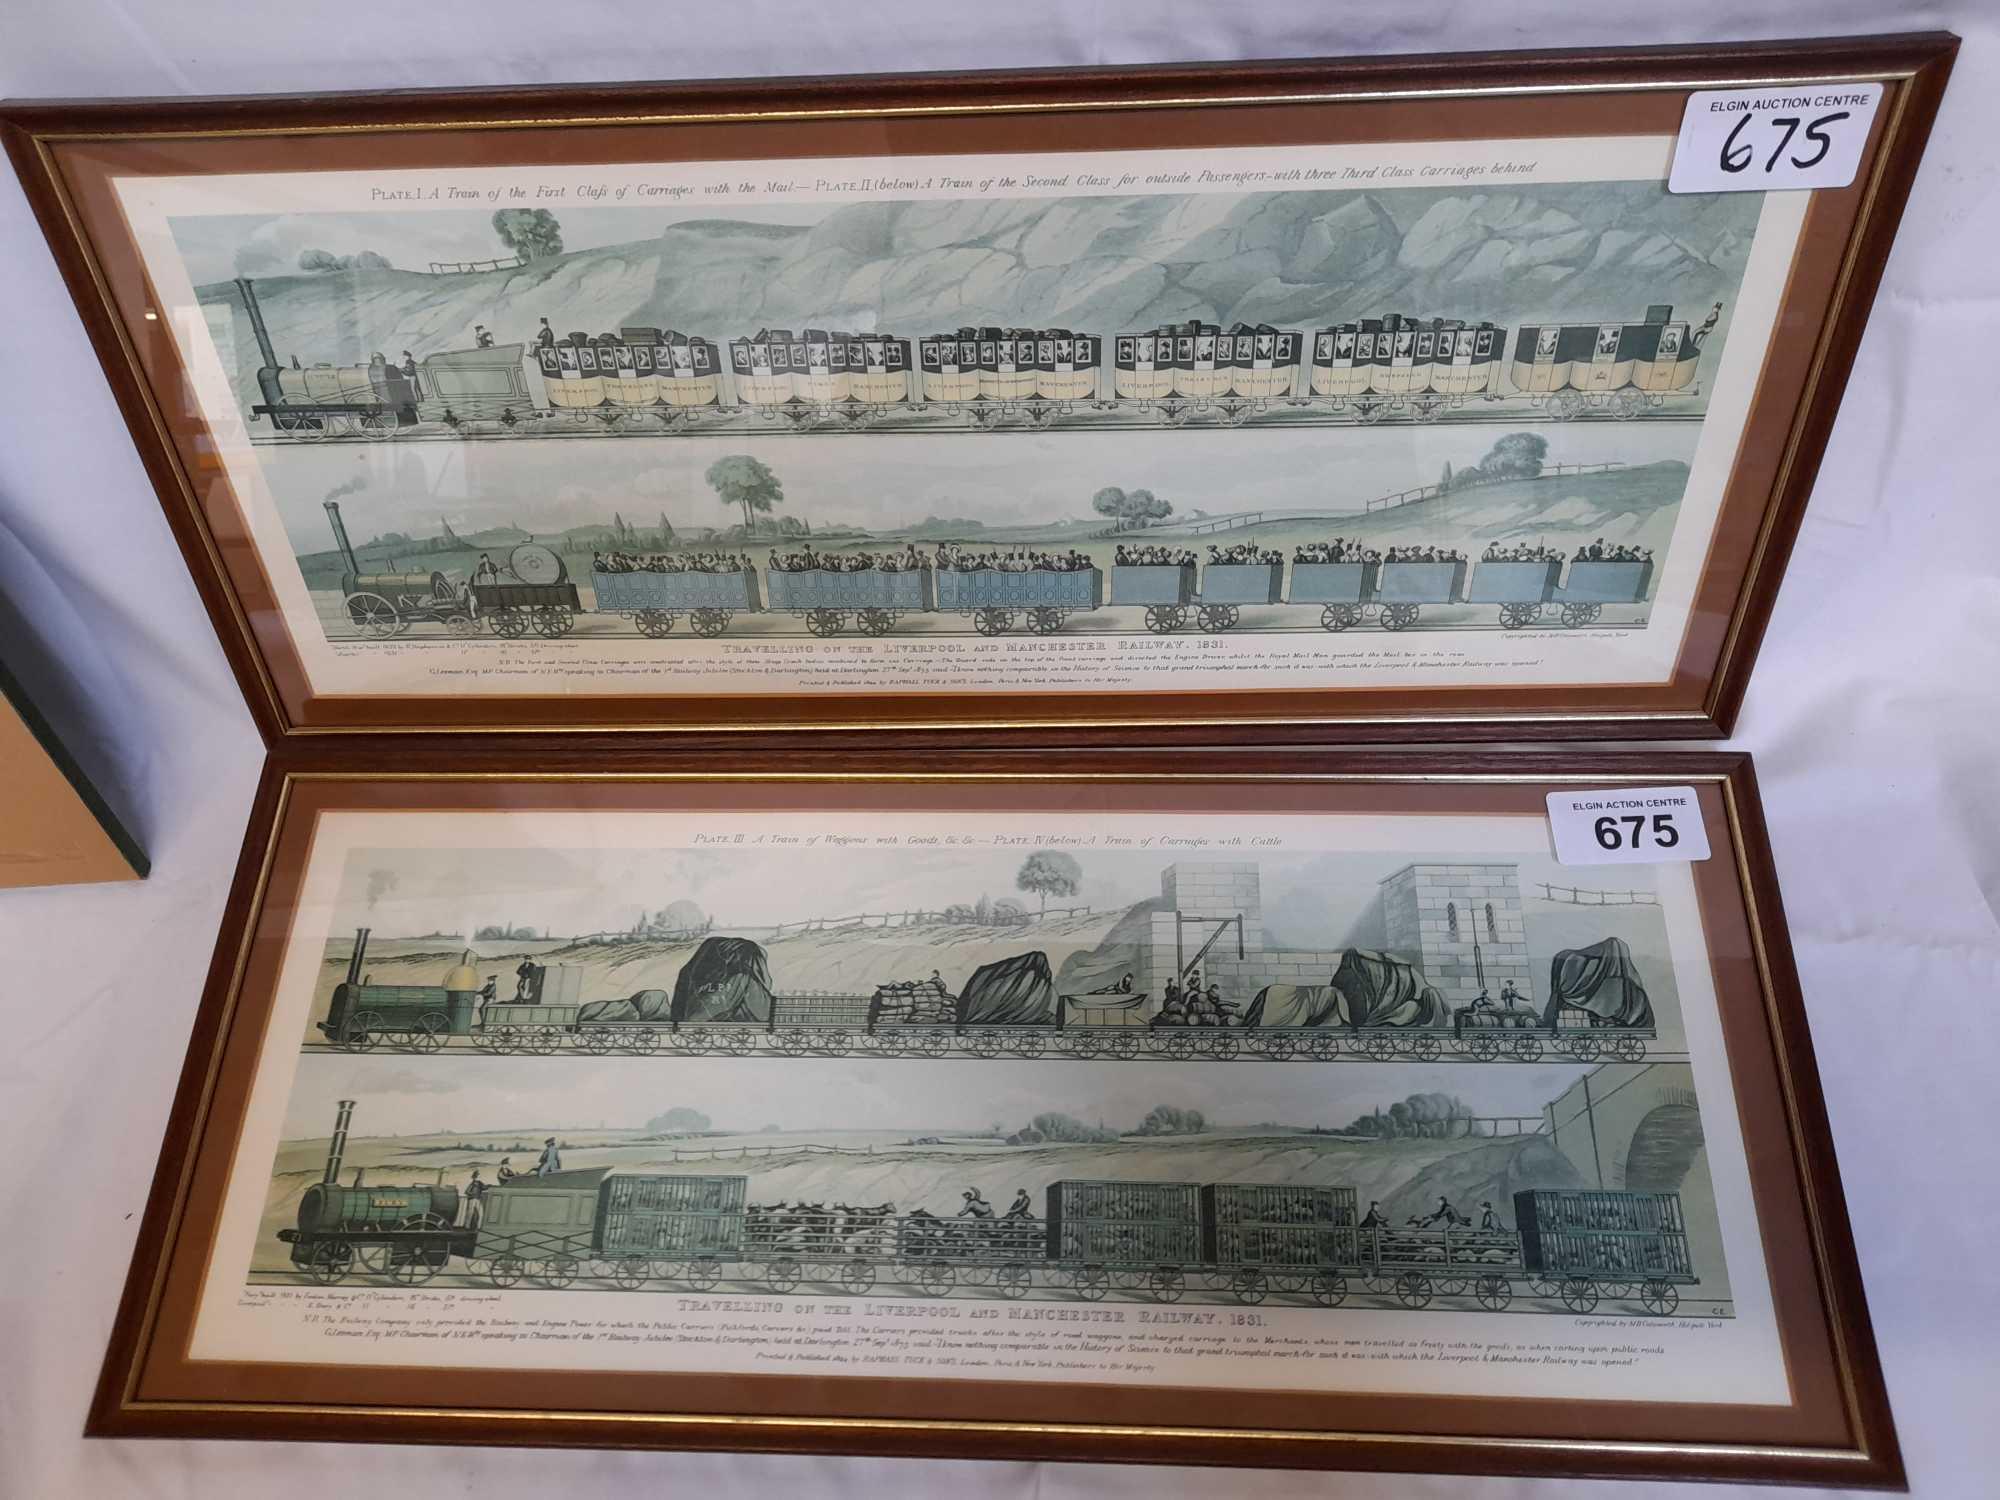 2 PRINTS LIVERPOOL & MANCHESTER RAILWAY 1831 - Image 4 of 6